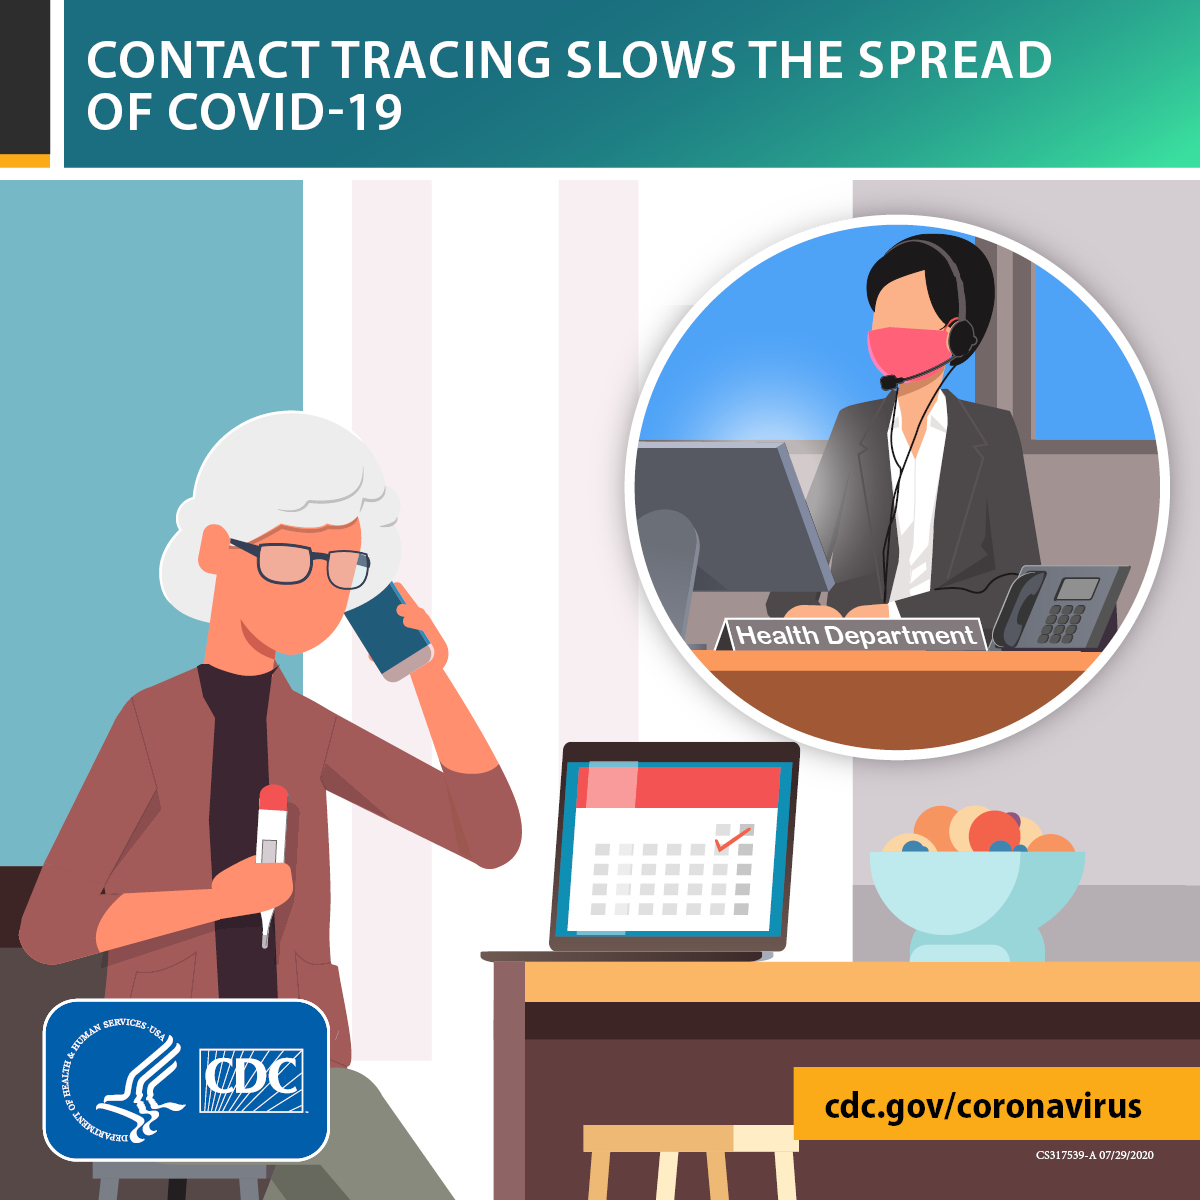 Image of person talking to a person from the health department. cdc.gov/coronavirus.